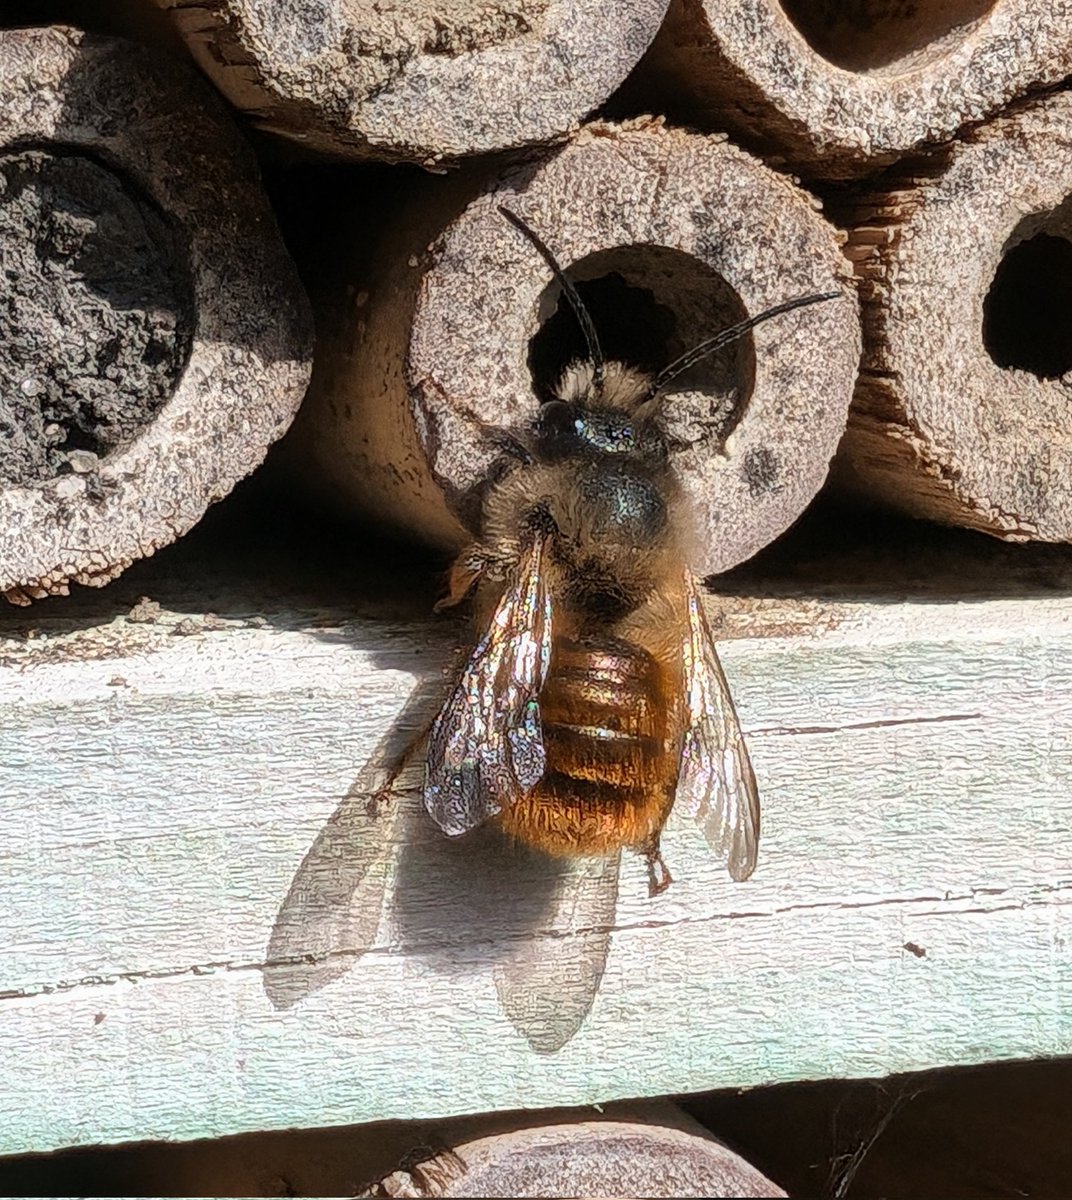 Yay! Red Mason Bees (Osmia bicornis) finally streaming out of the bee hotel today. Wonder if this is the year I can encourage them to use the observation box instead... 🤔🐝 #bees